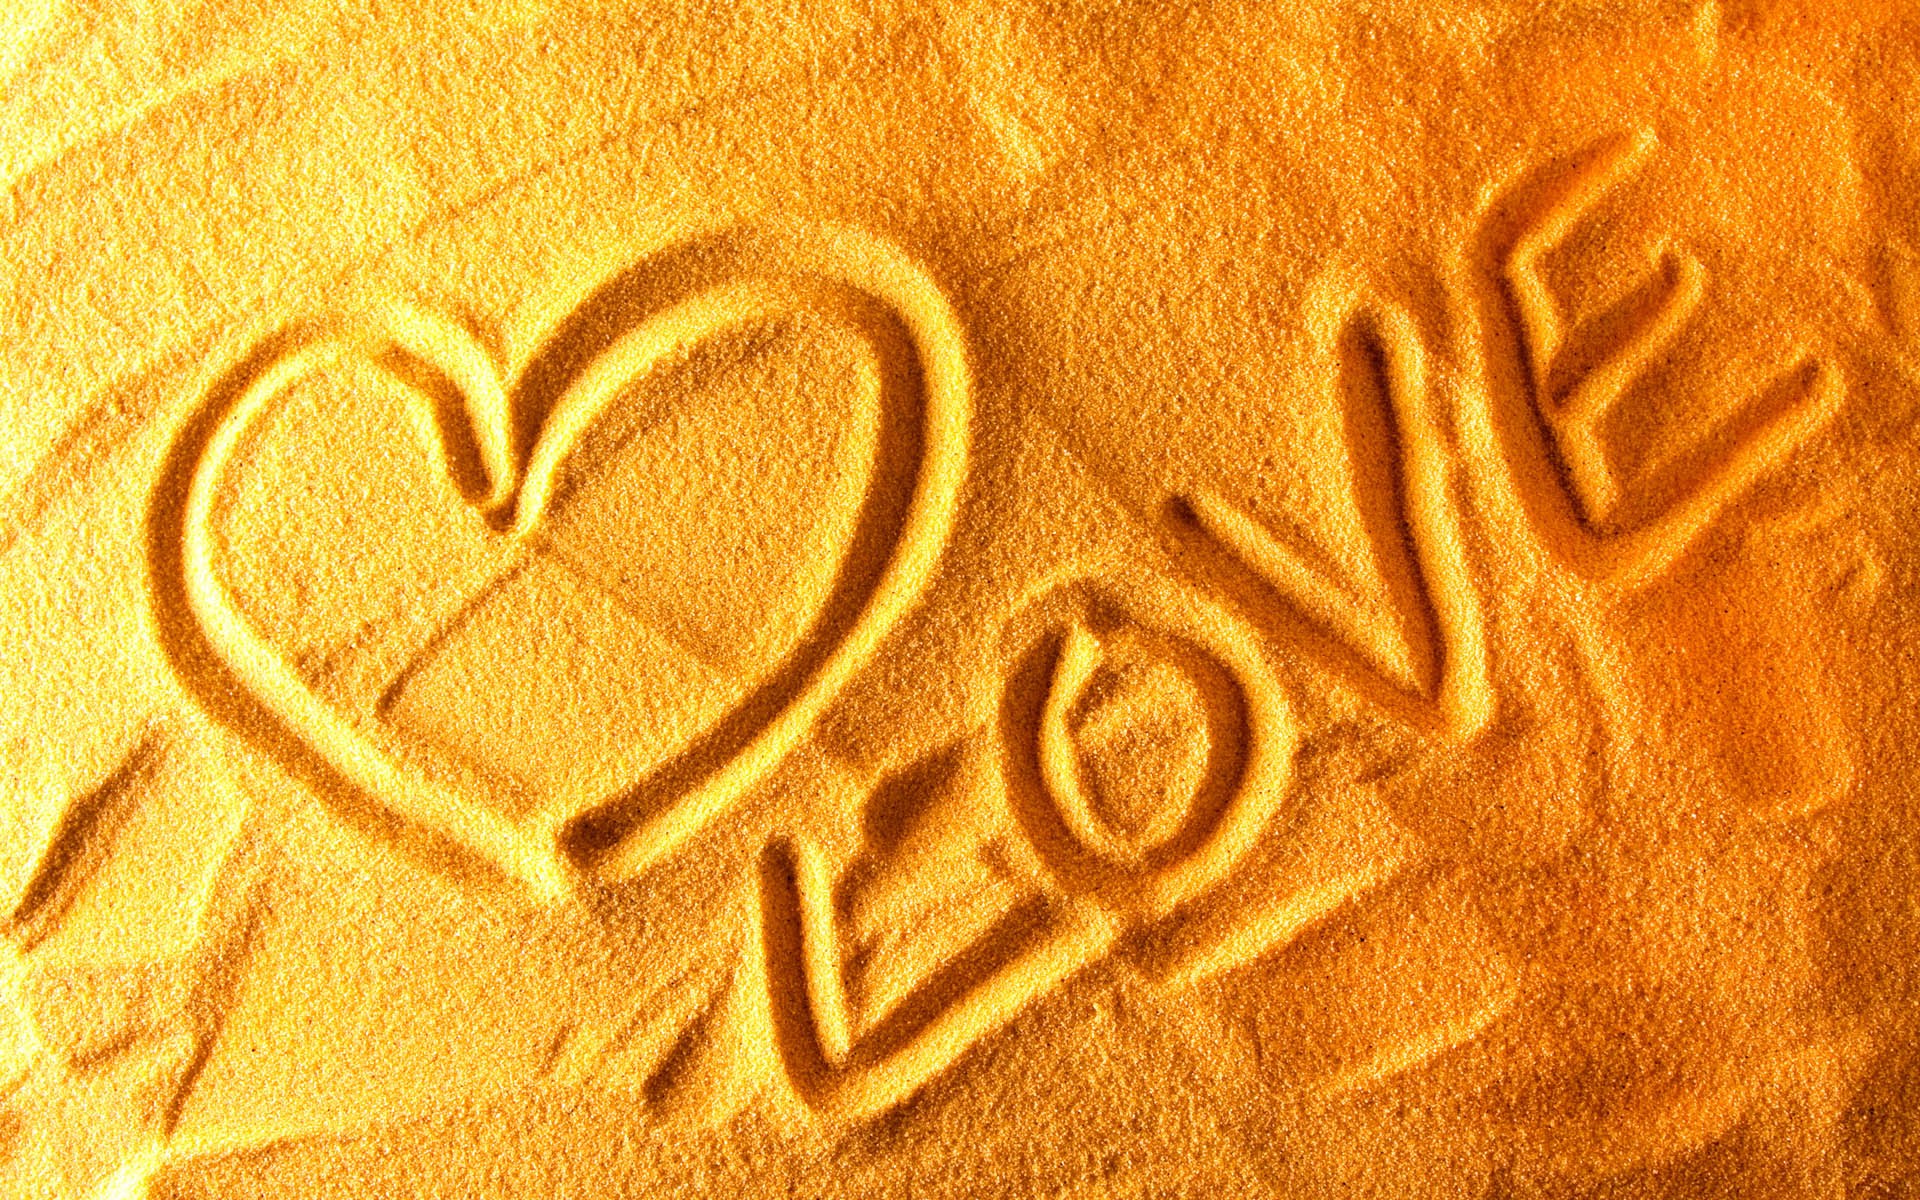 Heart and Love written in the sand on a beach.